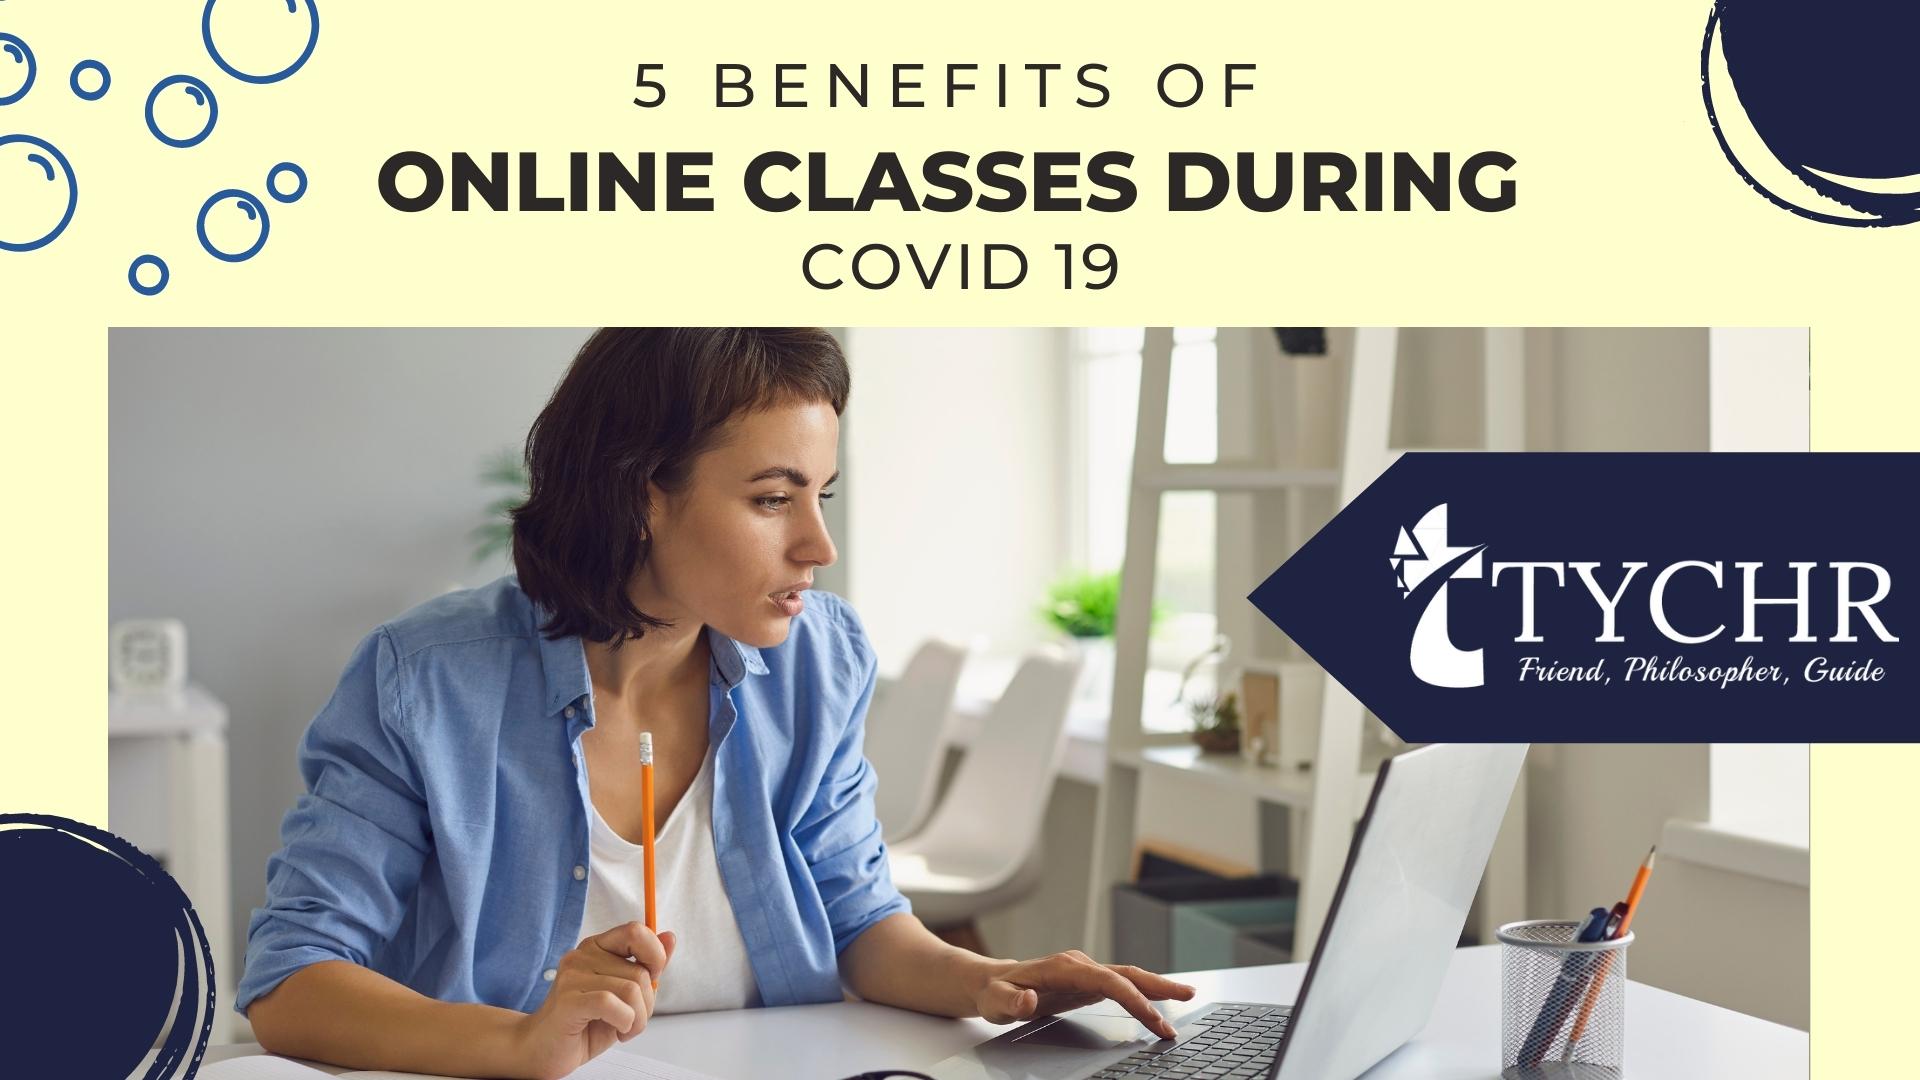 5 Benefits of Online Classes During COVID 19